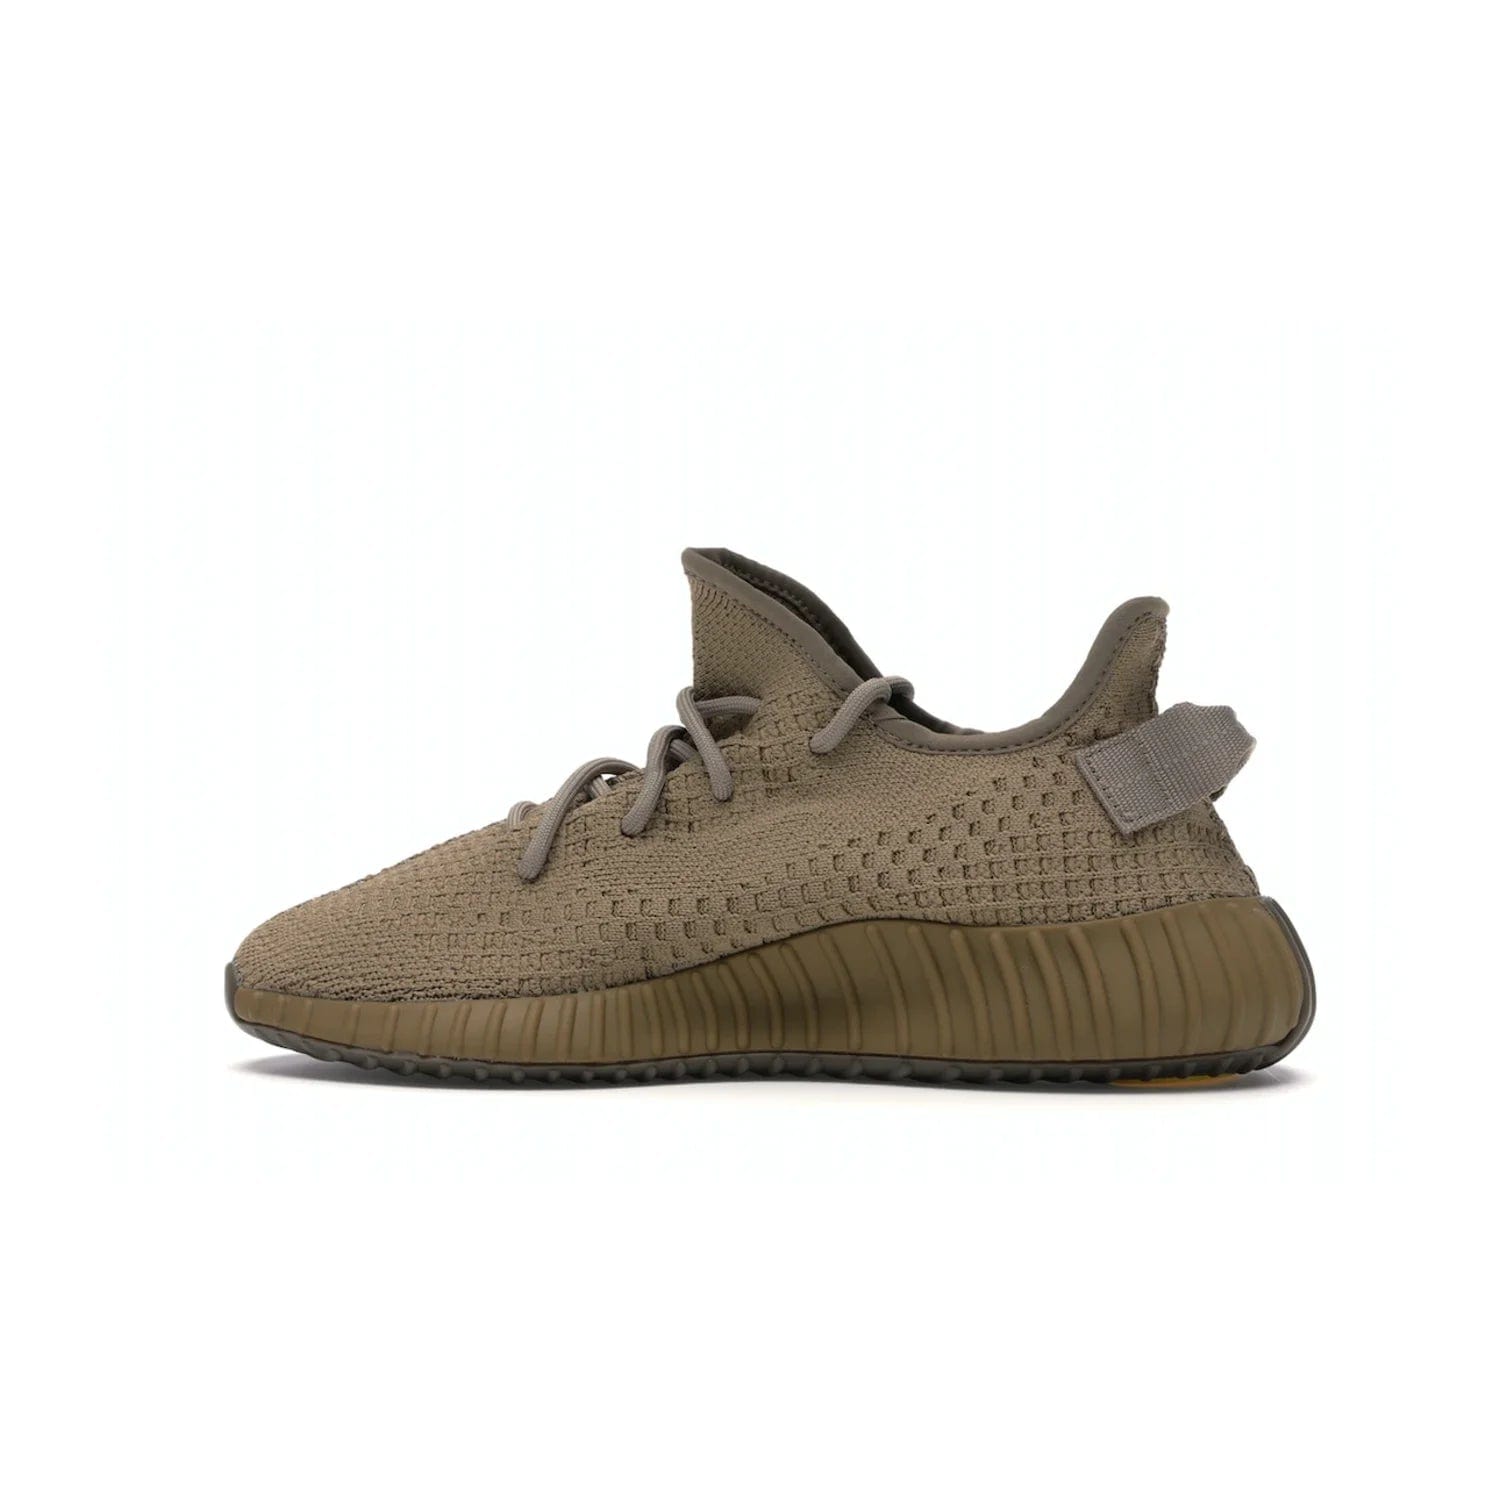 adidas Yeezy Boost 350 V2 Earth - Image 20 - Only at www.BallersClubKickz.com - Abstract style with the adidas Yeezy Boost 350 V2 Earth. Crafted with mud Primeknit upper, mud Boost and interior, and a translucent side stripe. Regional exclusive in Earth/Earth/Earth colorway, these fashionable sneakers released in February 2020. Showcase your style with the Yeezy 350 V2 Earth.